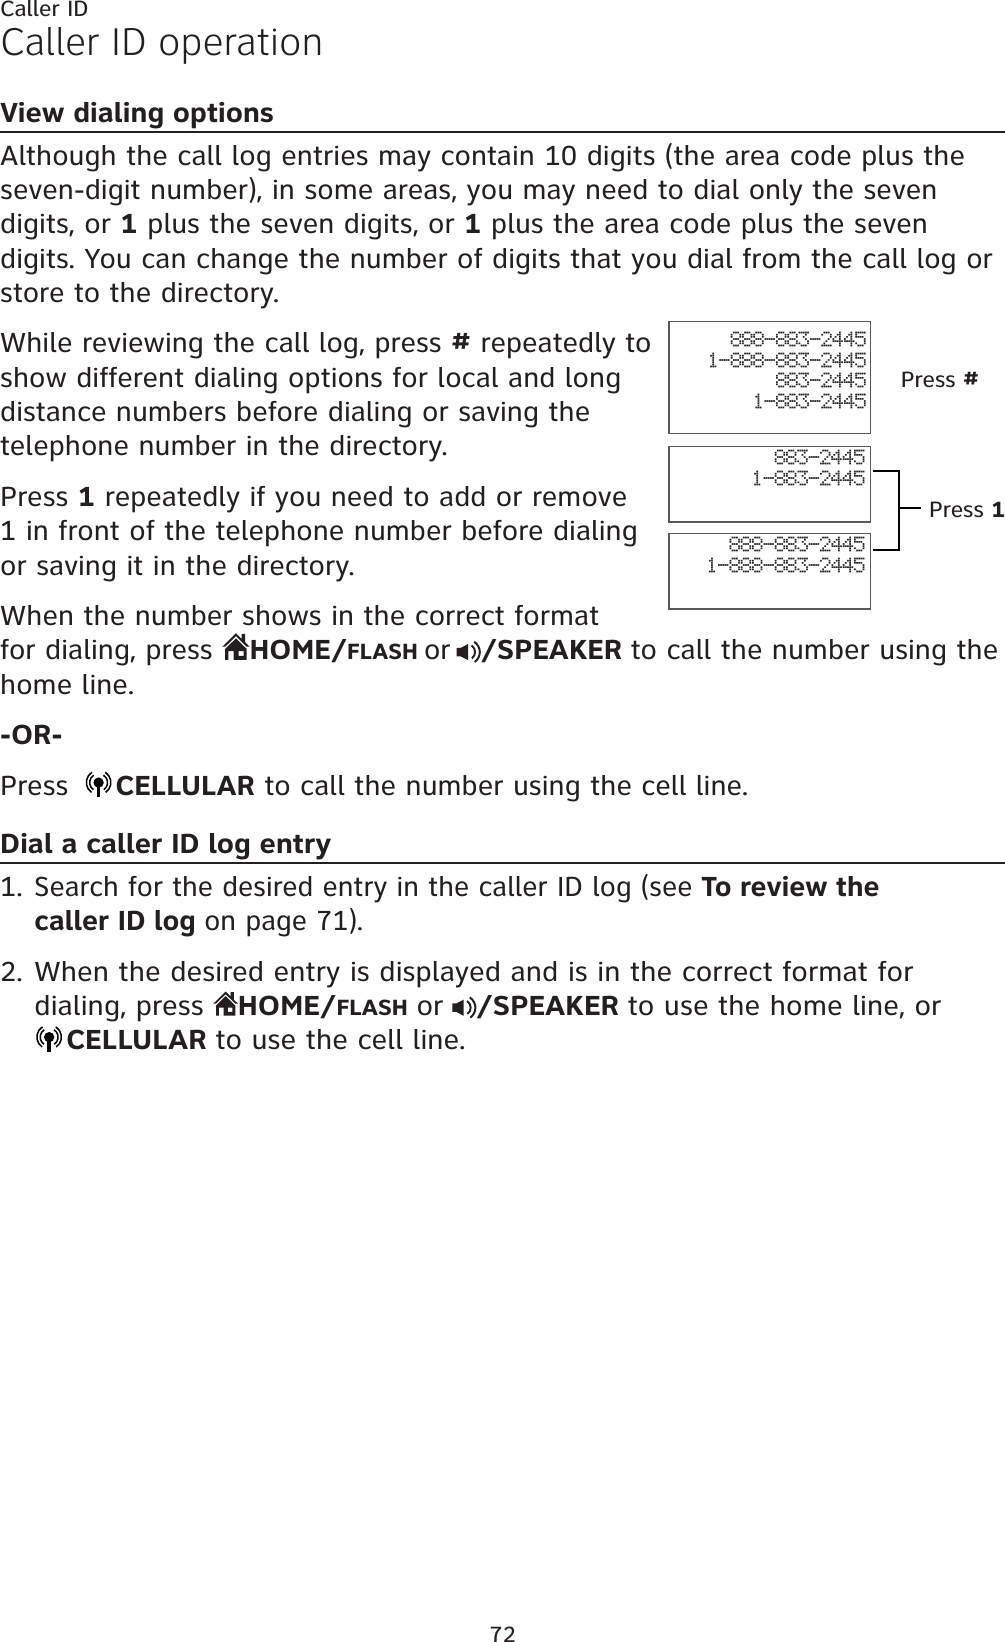 72Caller IDCaller ID operationView dialing optionsAlthough the call log entries may contain 10 digits (the area code plus the seven-digit number), in some areas, you may need to dial only the seven digits, or 1 plus the seven digits, or 1 plus the area code plus the seven digits. You can change the number of digits that you dial from the call log or store to the directory. While reviewing the call log, press # repeatedly to show different dialing options for local and long distance numbers before dialing or saving the telephone number in the directory.Press 1 repeatedly if you need to add or remove 1 in front of the telephone number before dialing or saving it in the directory.When the number shows in the correct format for dialing, press  HOME/FLASH or /SPEAKER to call the number using the home line.-OR-Press  CELLULAR to call the number using the cell line.Dial a caller ID log entrySearch for the desired entry in the caller ID log (see To review the caller ID log on page 71).When the desired entry is displayed and is in the correct format for dialing, press  HOME/FLASHor /SPEAKER to use the home line, orCELLULAR to use the cell line.1.2.888-883-24451-888-883-2445883-24451-883-2445888-883-24451-888-883-2445883-24451-883-2445Press #Press 1